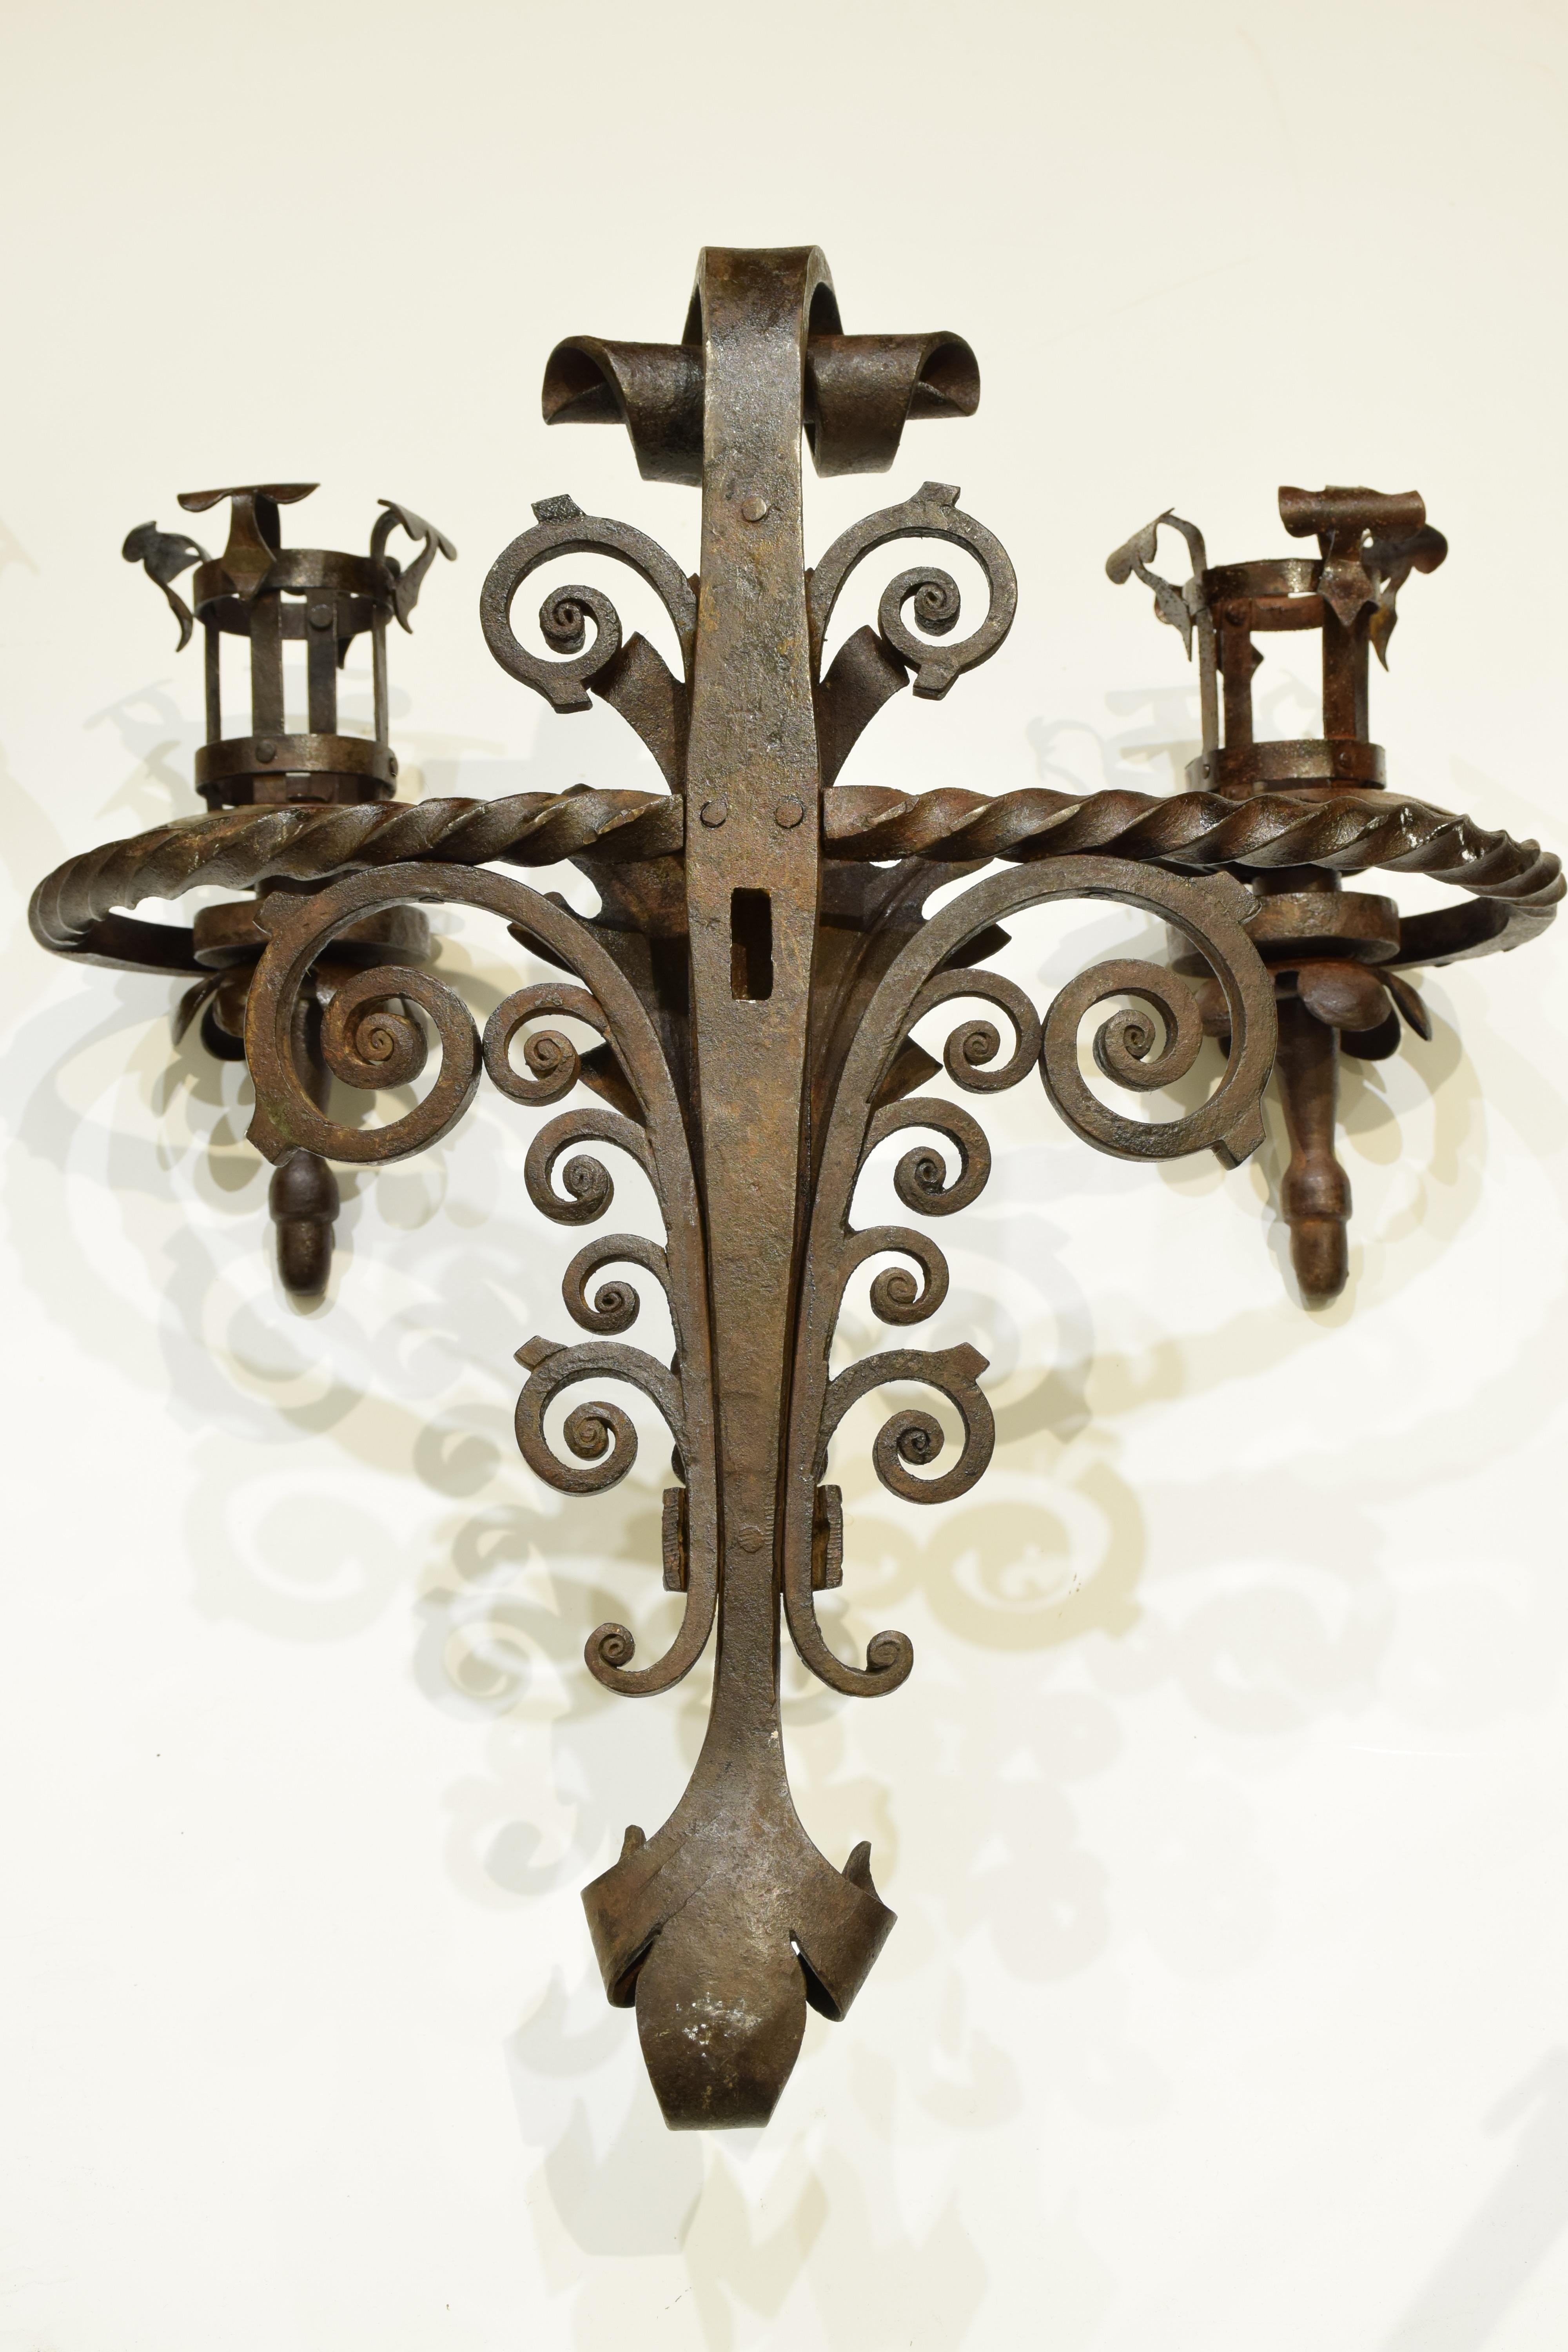 Pair of Wrought Iron Sconces with Double Candle Holders Black, Late 19th Century For Sale 1